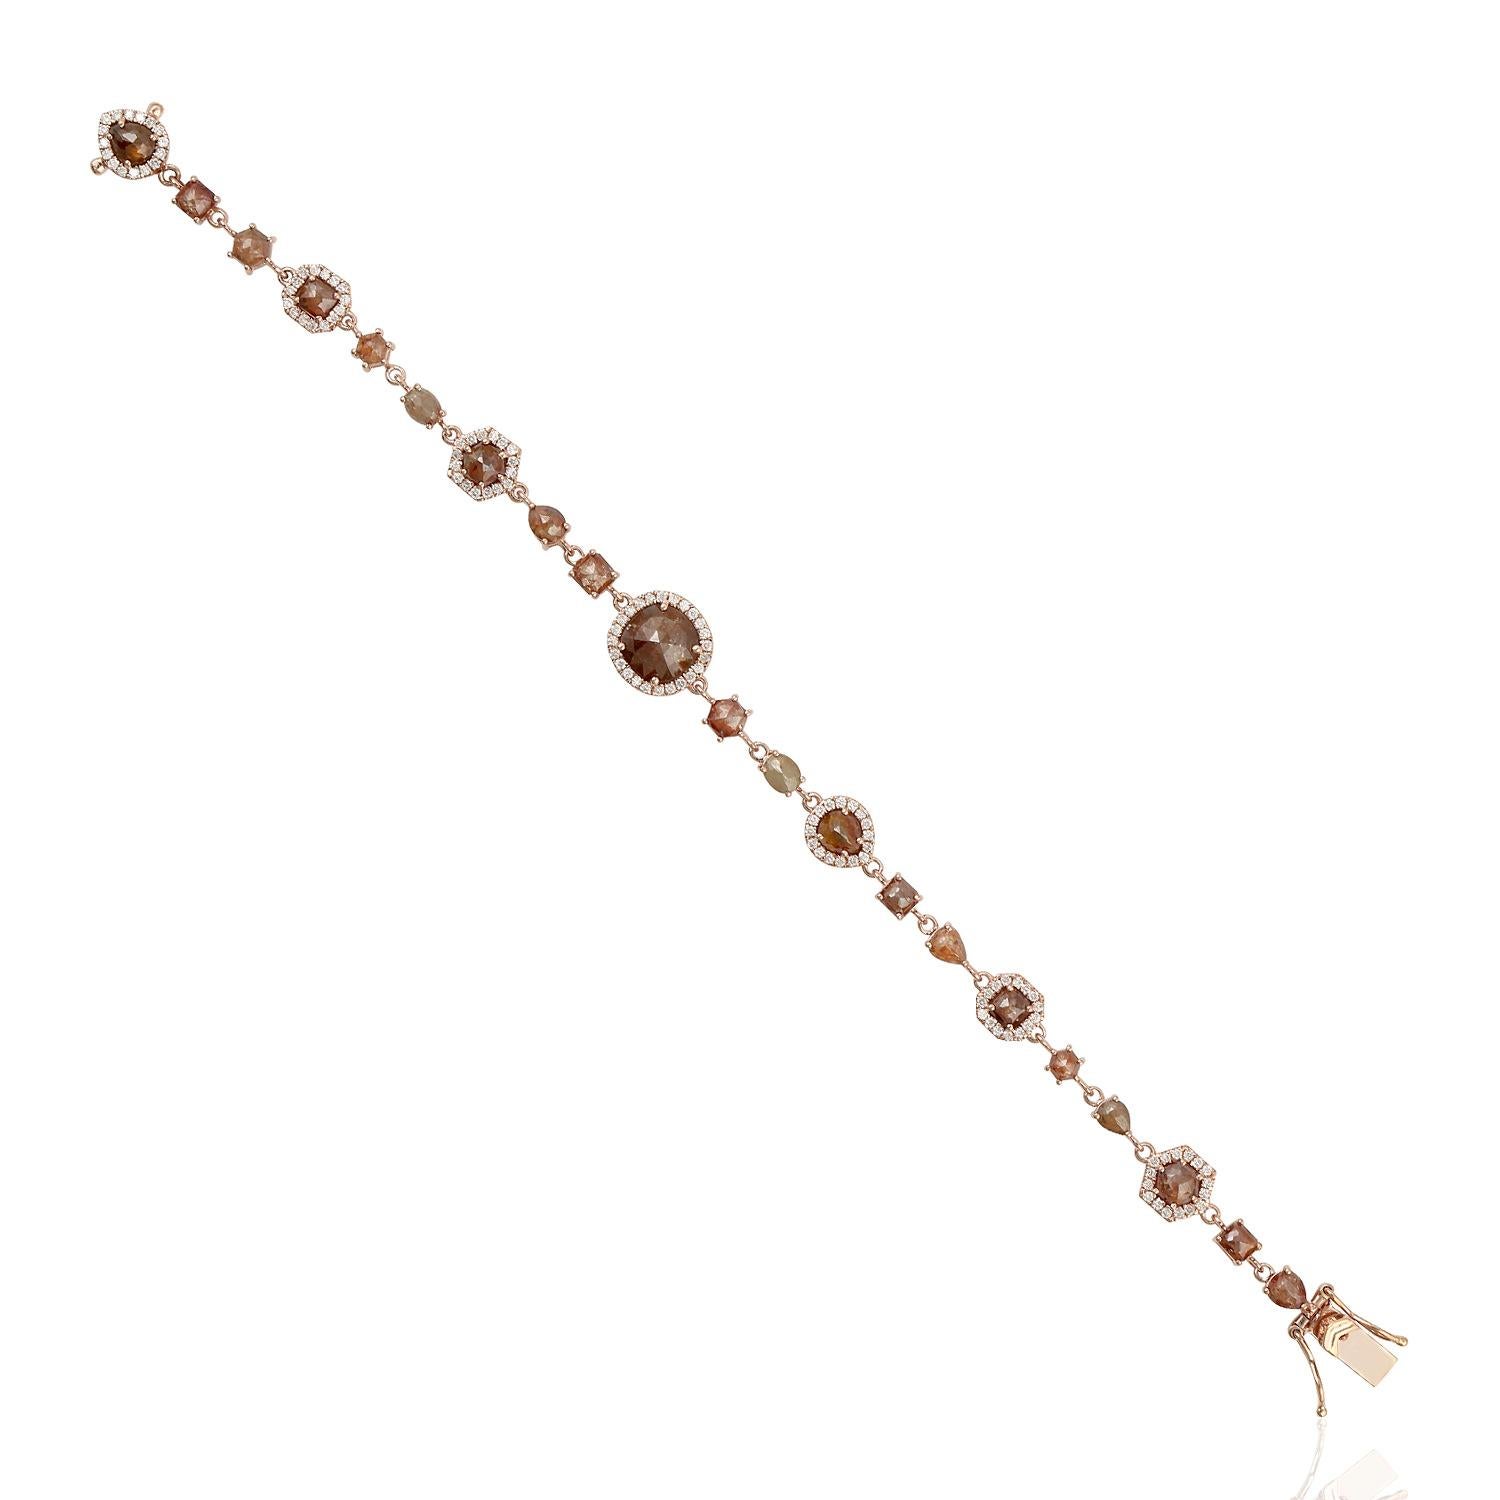 A stunning bracelet handmade in 18K rose gold and set in 7.67 carats of sparkling diamonds. 

FOLLOW  MEGHNA JEWELS storefront to view the latest collection & exclusive pieces.  Meghna Jewels is proudly rated as a Top Seller on 1stdibs with 5 star